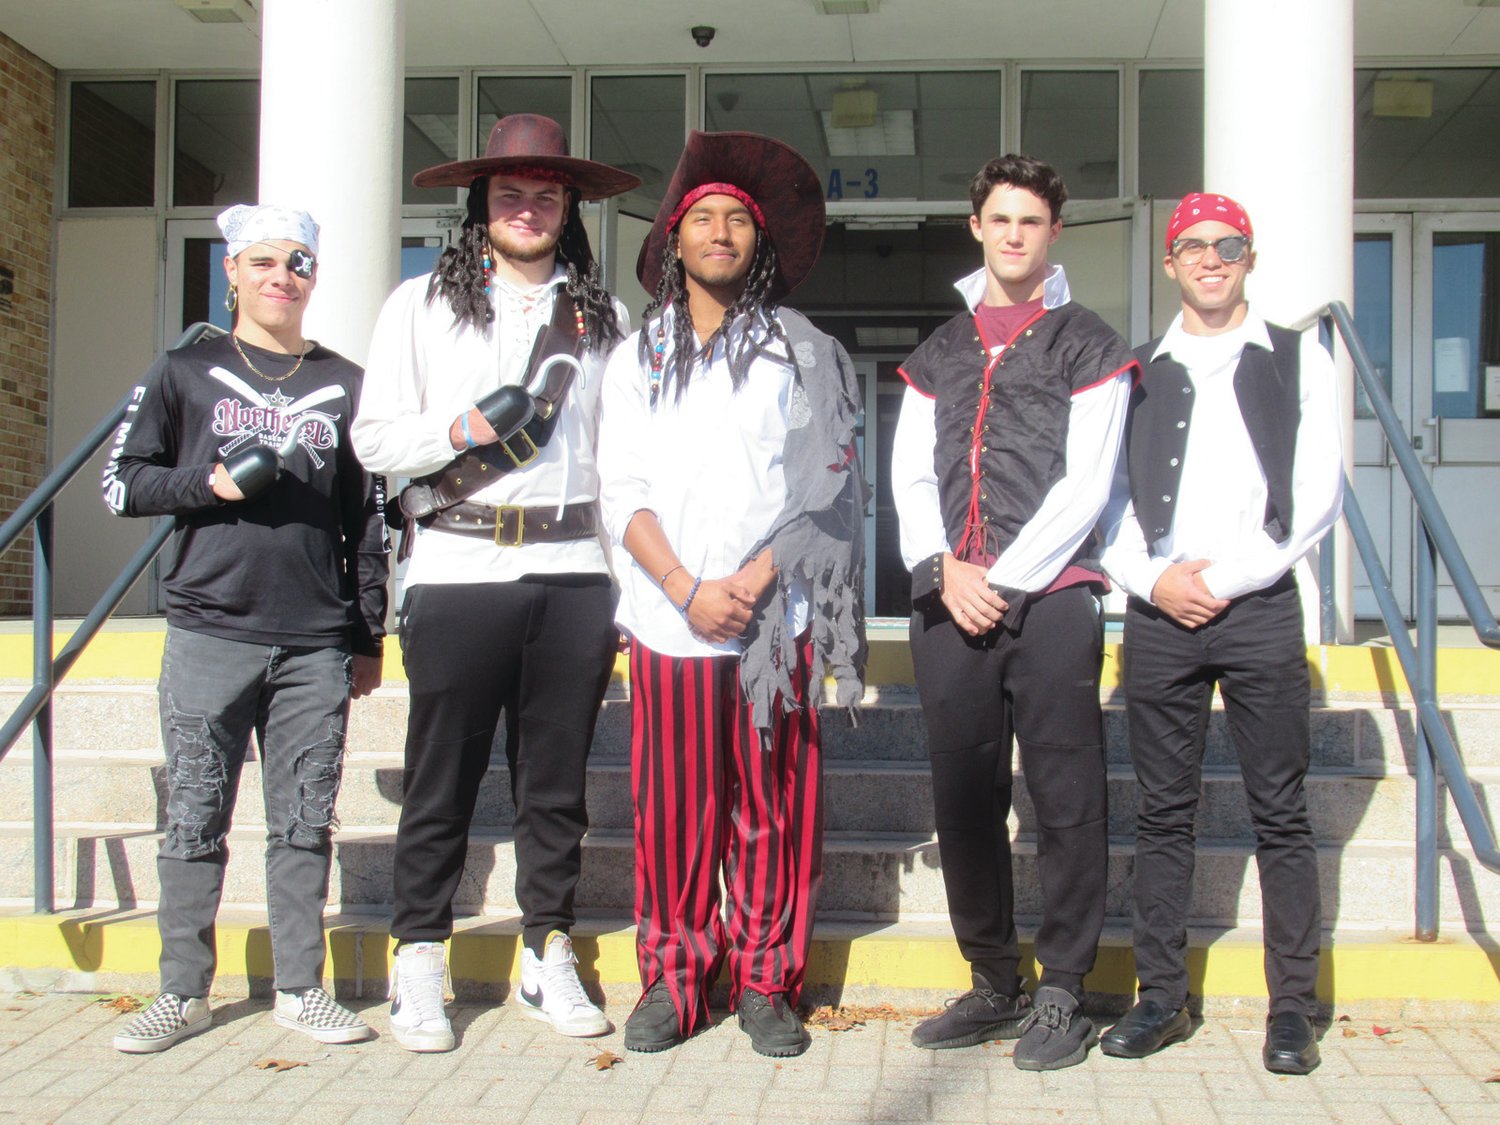 PANTHER PIRATES: The 2021 Homecoming King will be selected by a secret ballot. From left: Joe Vento, Ryan Schino, Jose Gonzalez, Joey Acciardo and Carlos Monteiro.